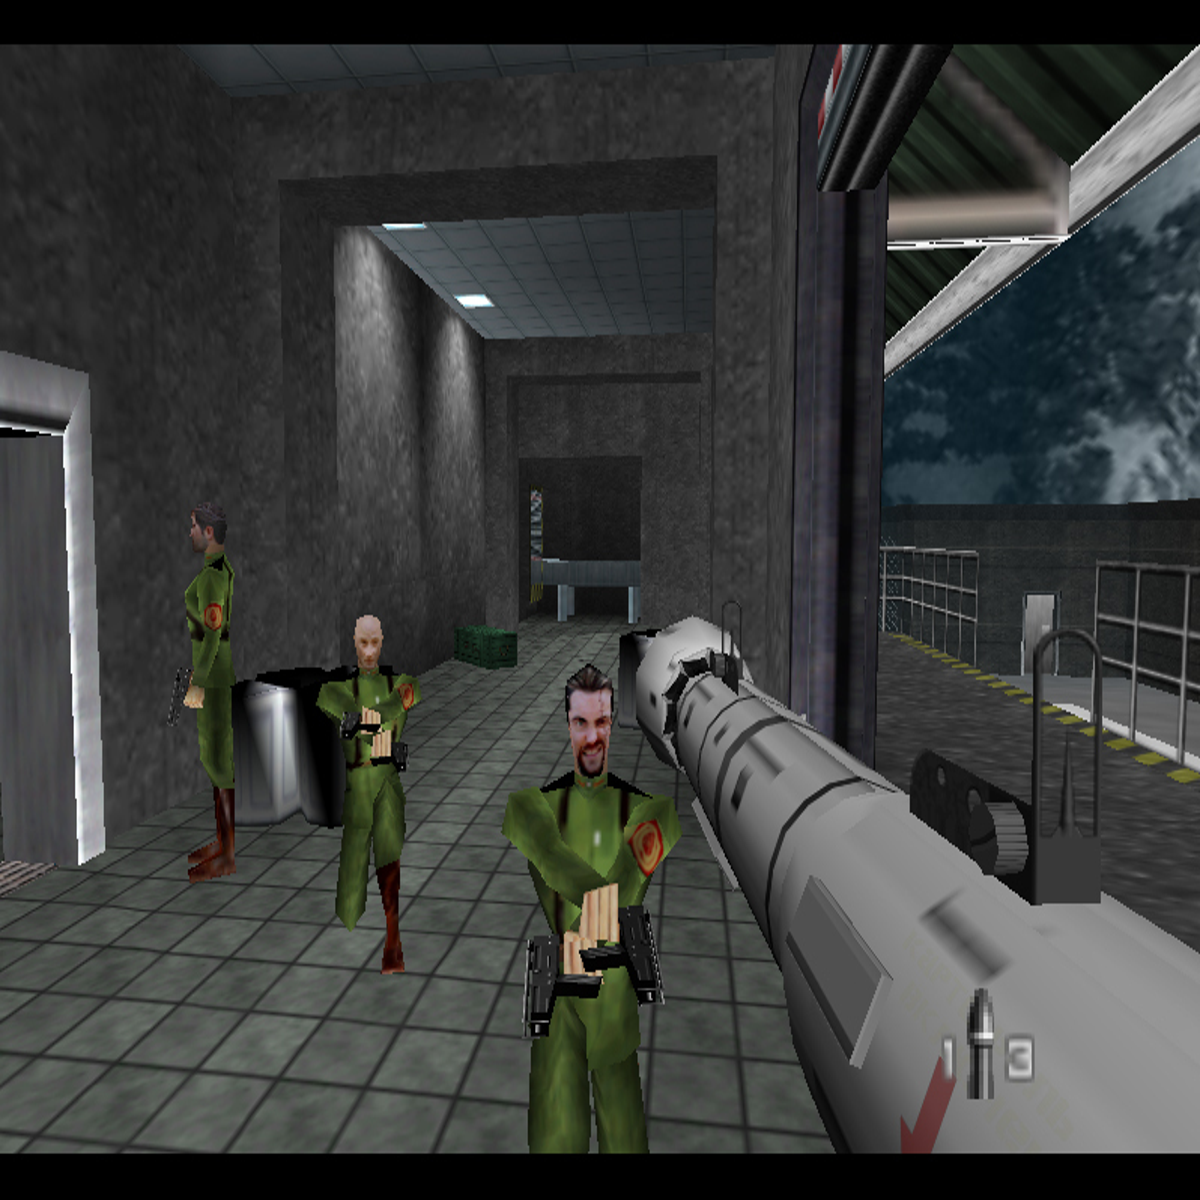 Goldeneye 007 achievements for Xbox have just been leaked online